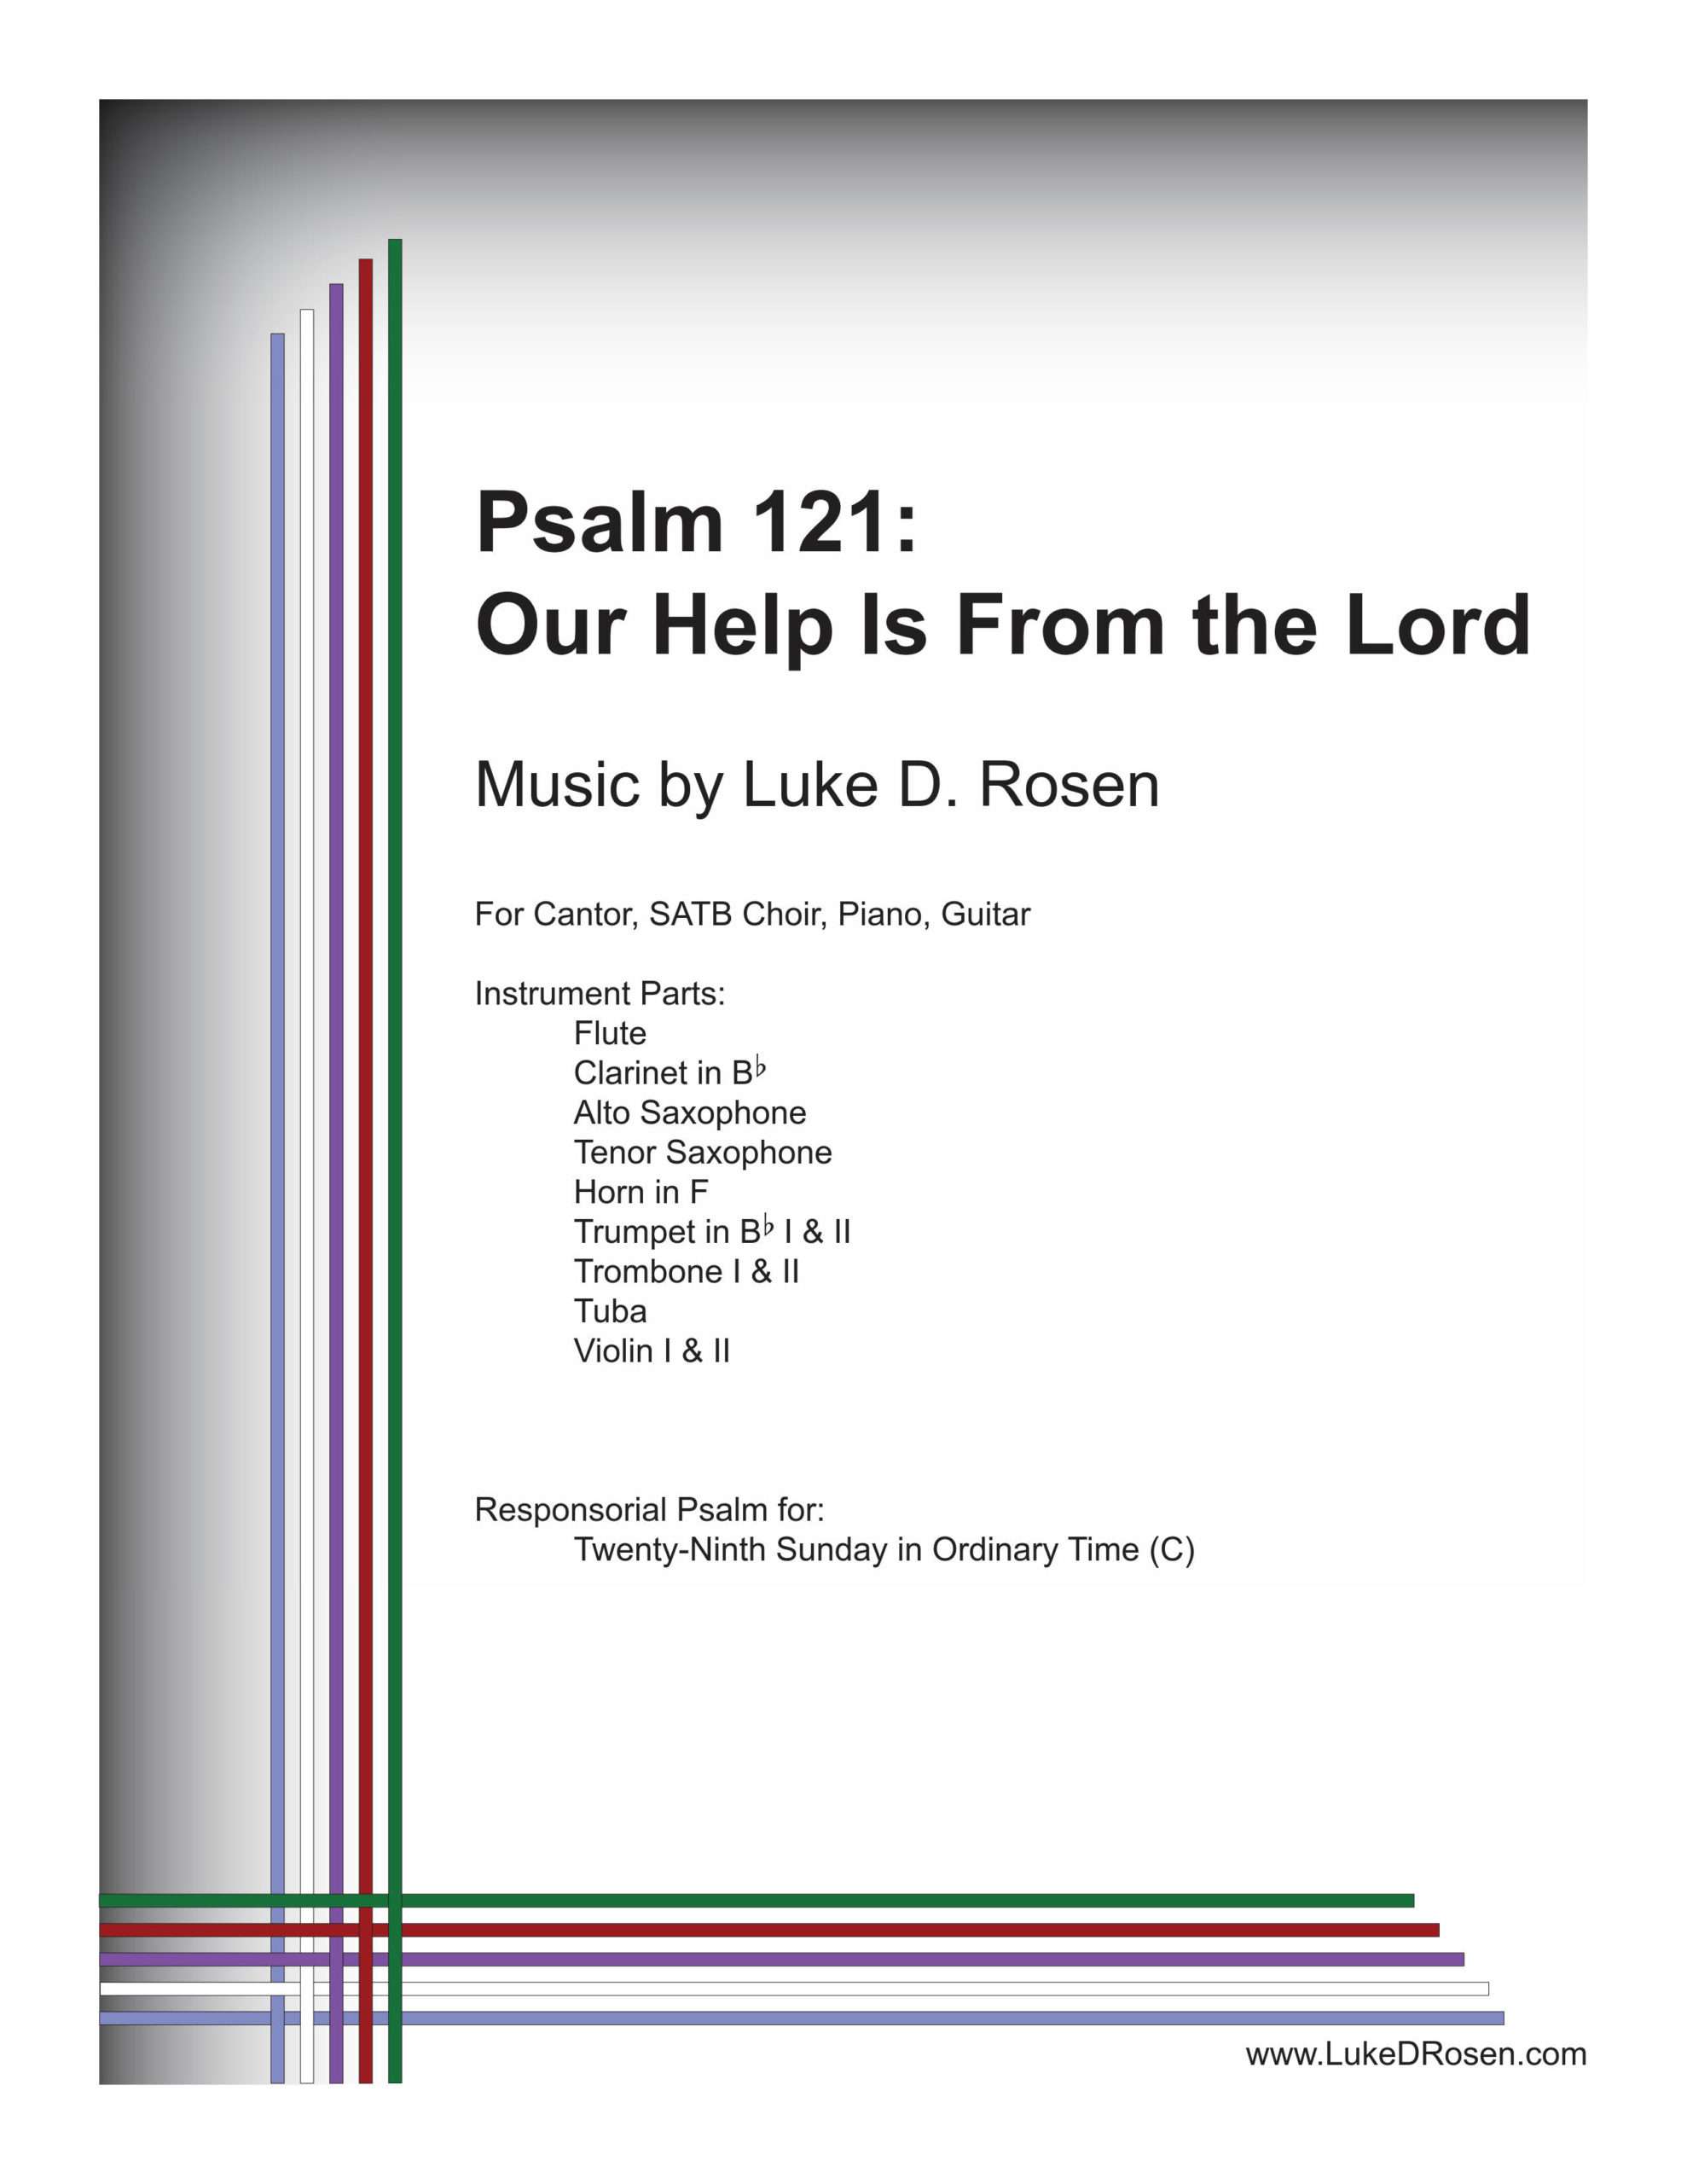 Psalm 121 – Our Help Is From the Lord (Rosen)